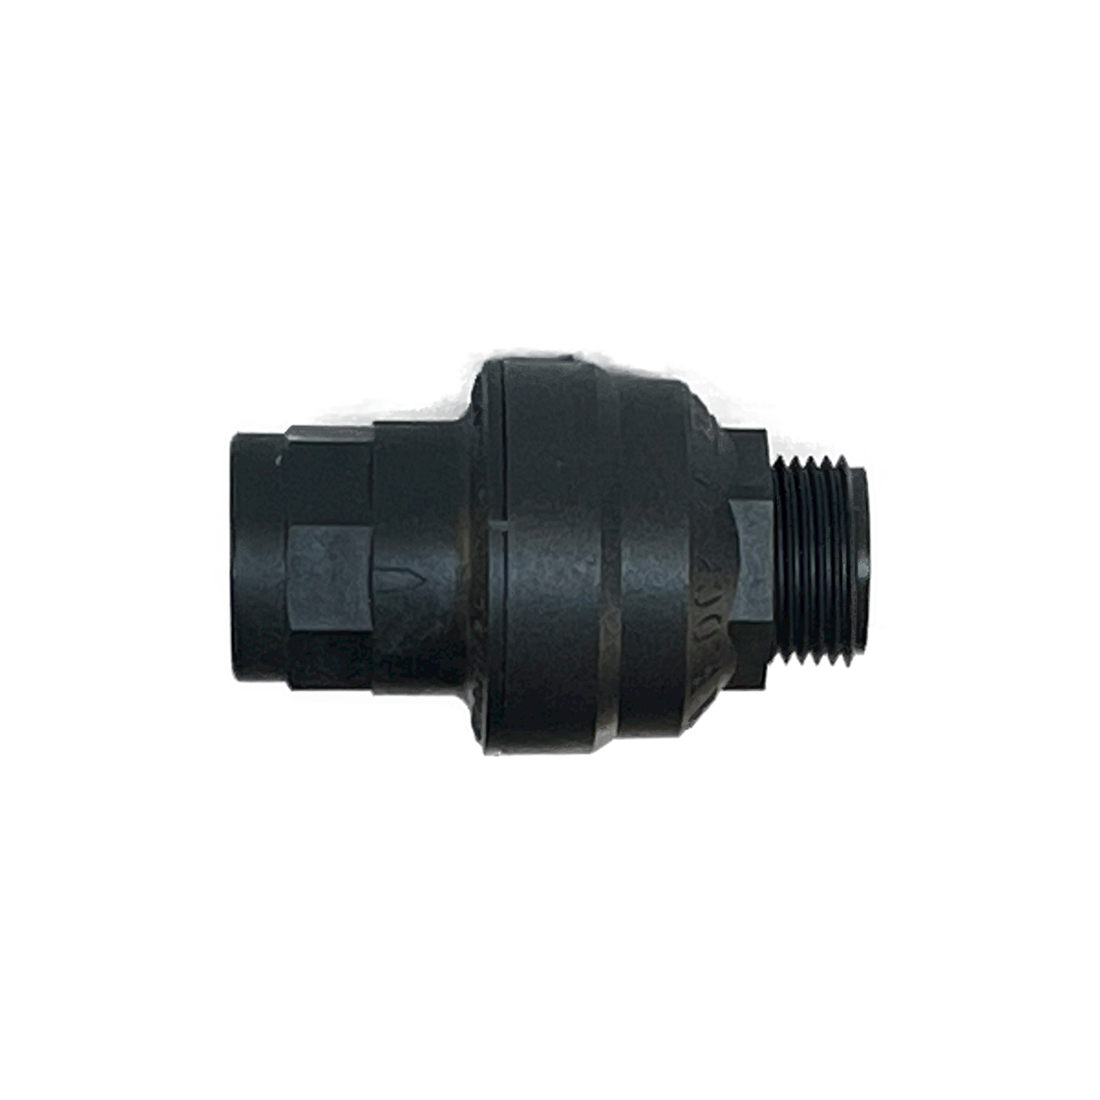 Water Block in the horizontal position. Black plastic device. Made for automatically shutting off the water in running water and leak situations.